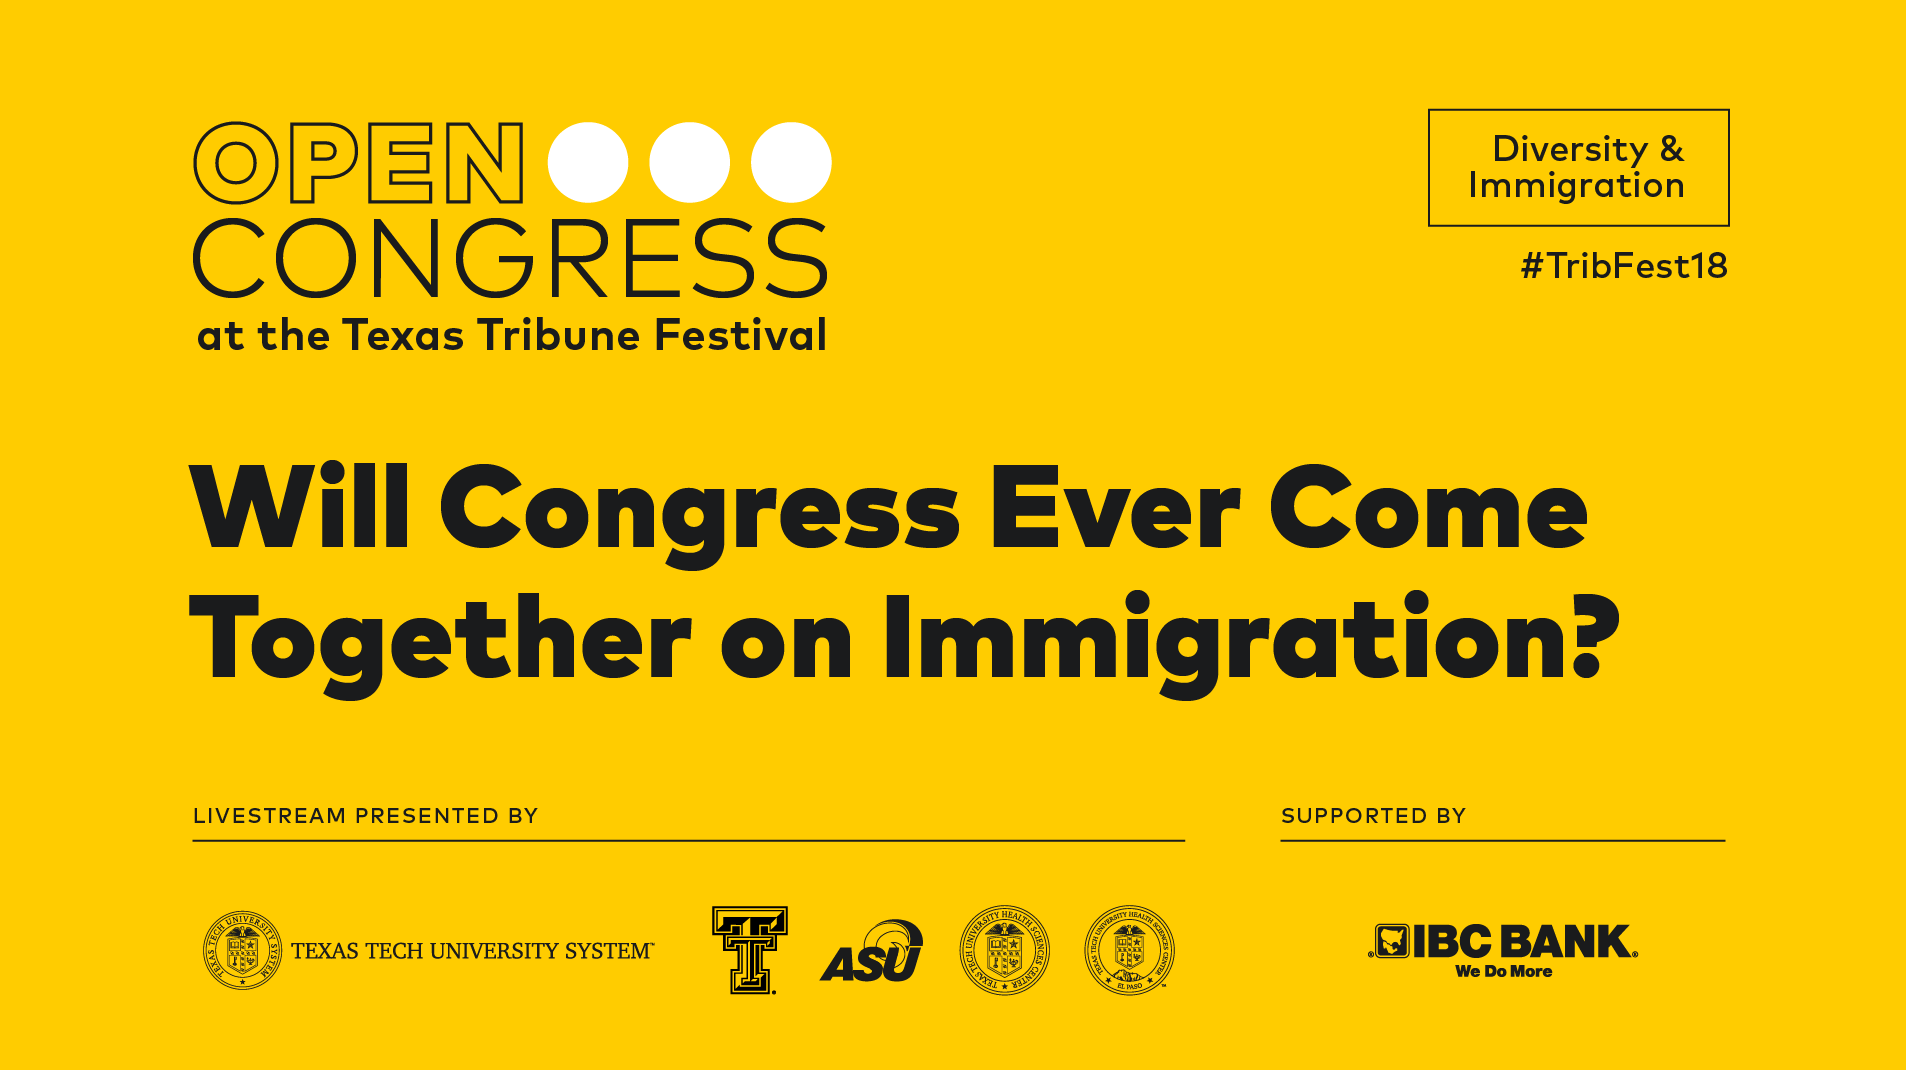 Will Congress Ever Come Together on Immigration? on Livestream